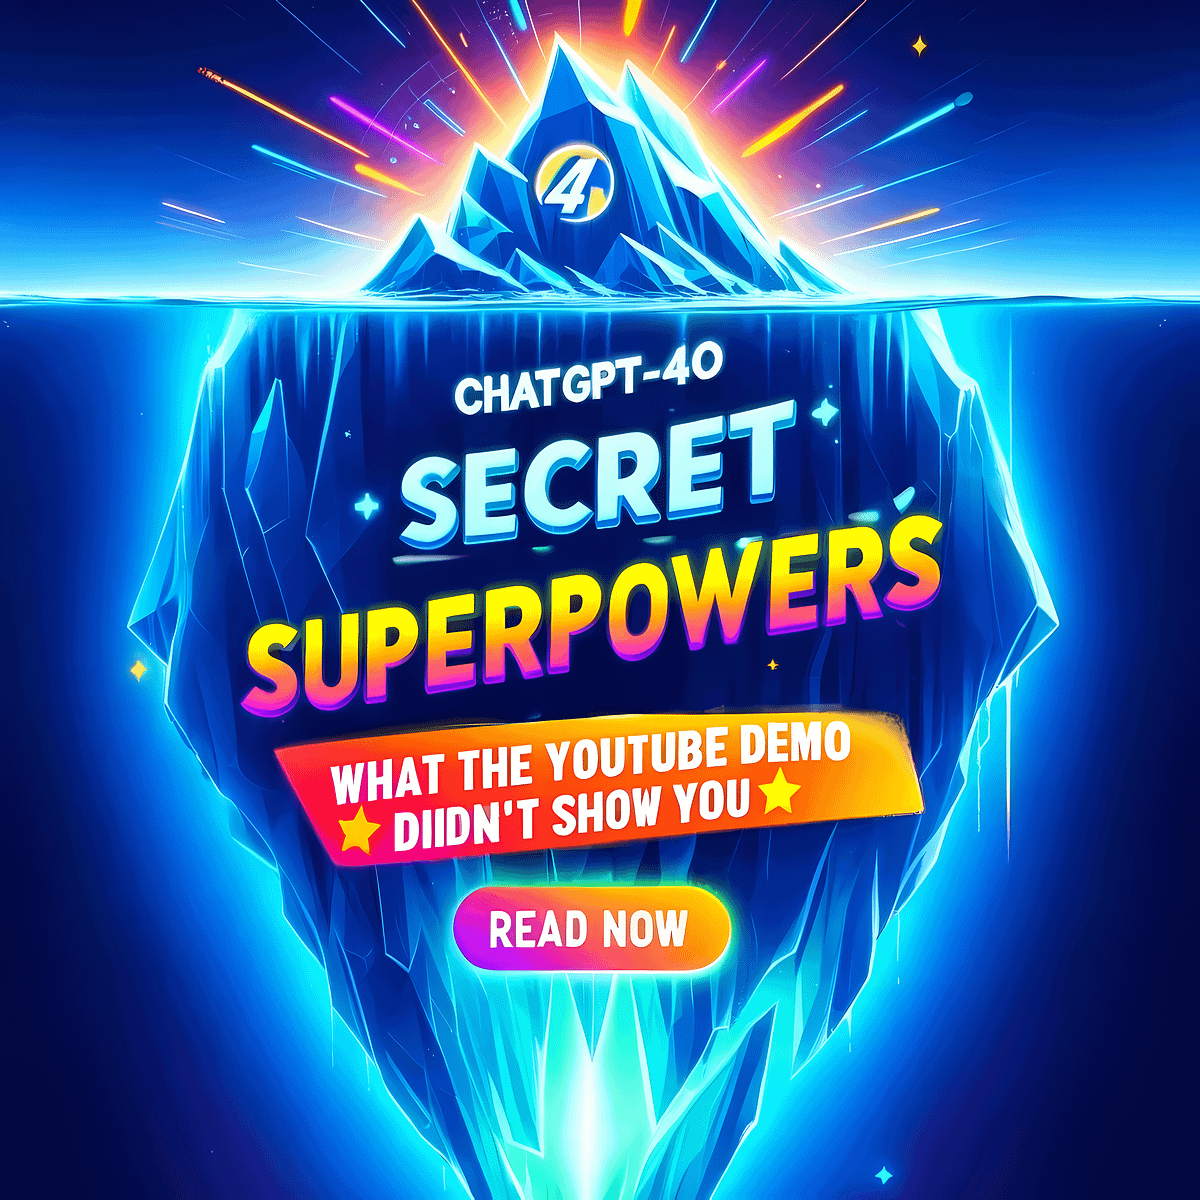 “ChatGPT-4o’s Secret Superpowers: What the YouTube Demo DIDN’T Show You 🤯”